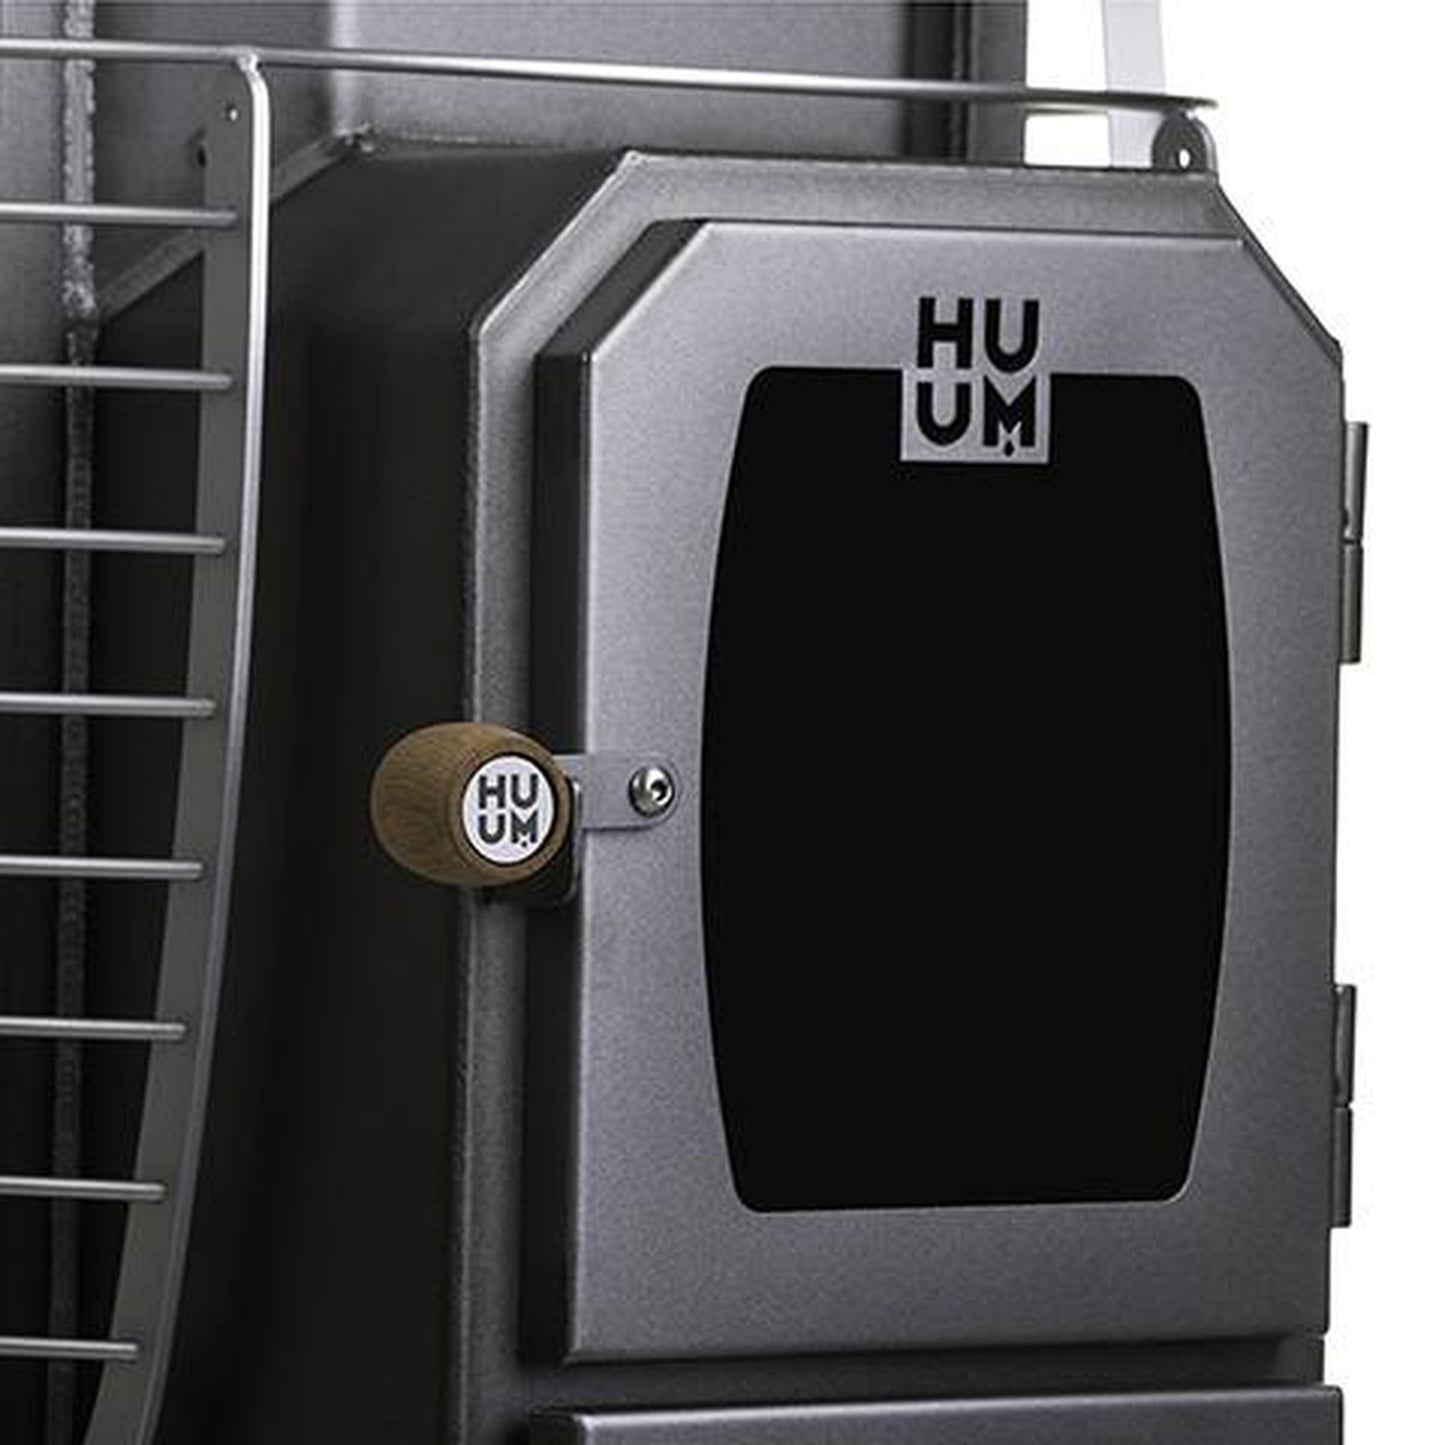 HUUM Hive Brushed Stainless Steel 13kW Wood Fired Sauna Stove